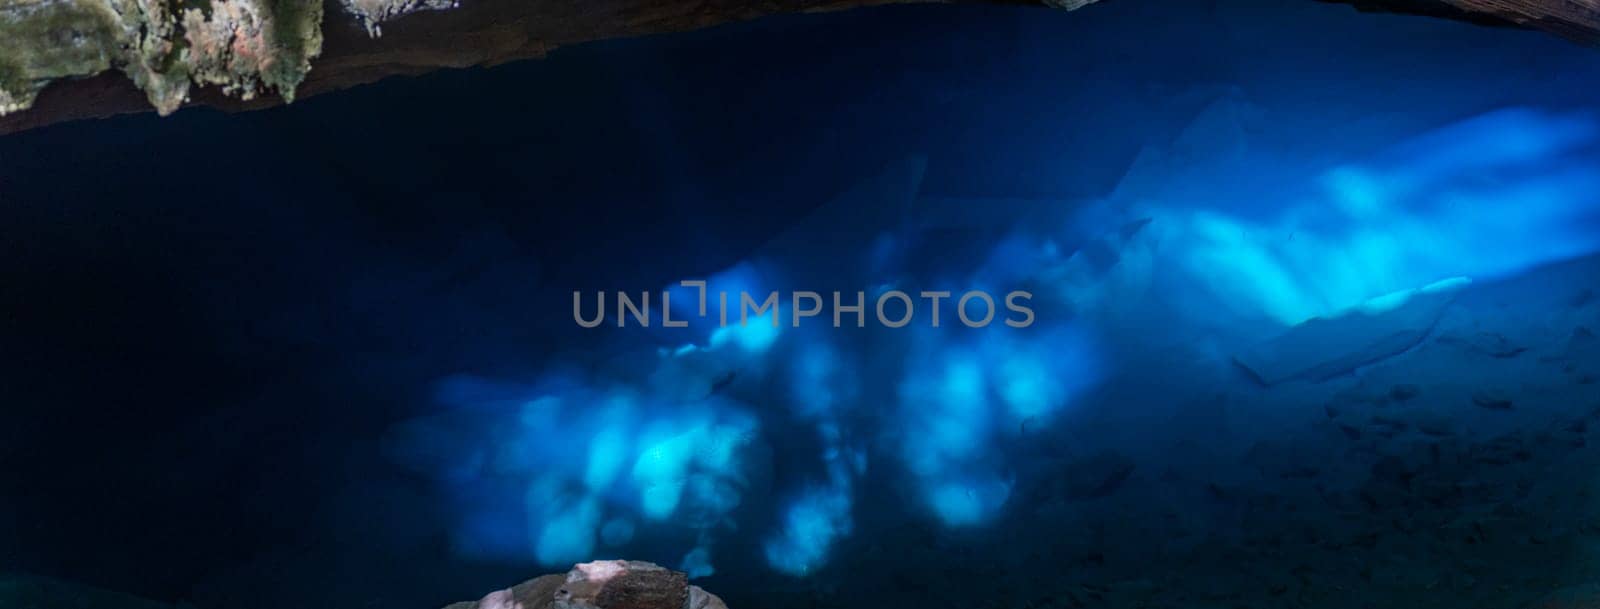 Underwater photo depicts a cave illuminated by surreal blue light, showcasing rocks and silhouetted figures.